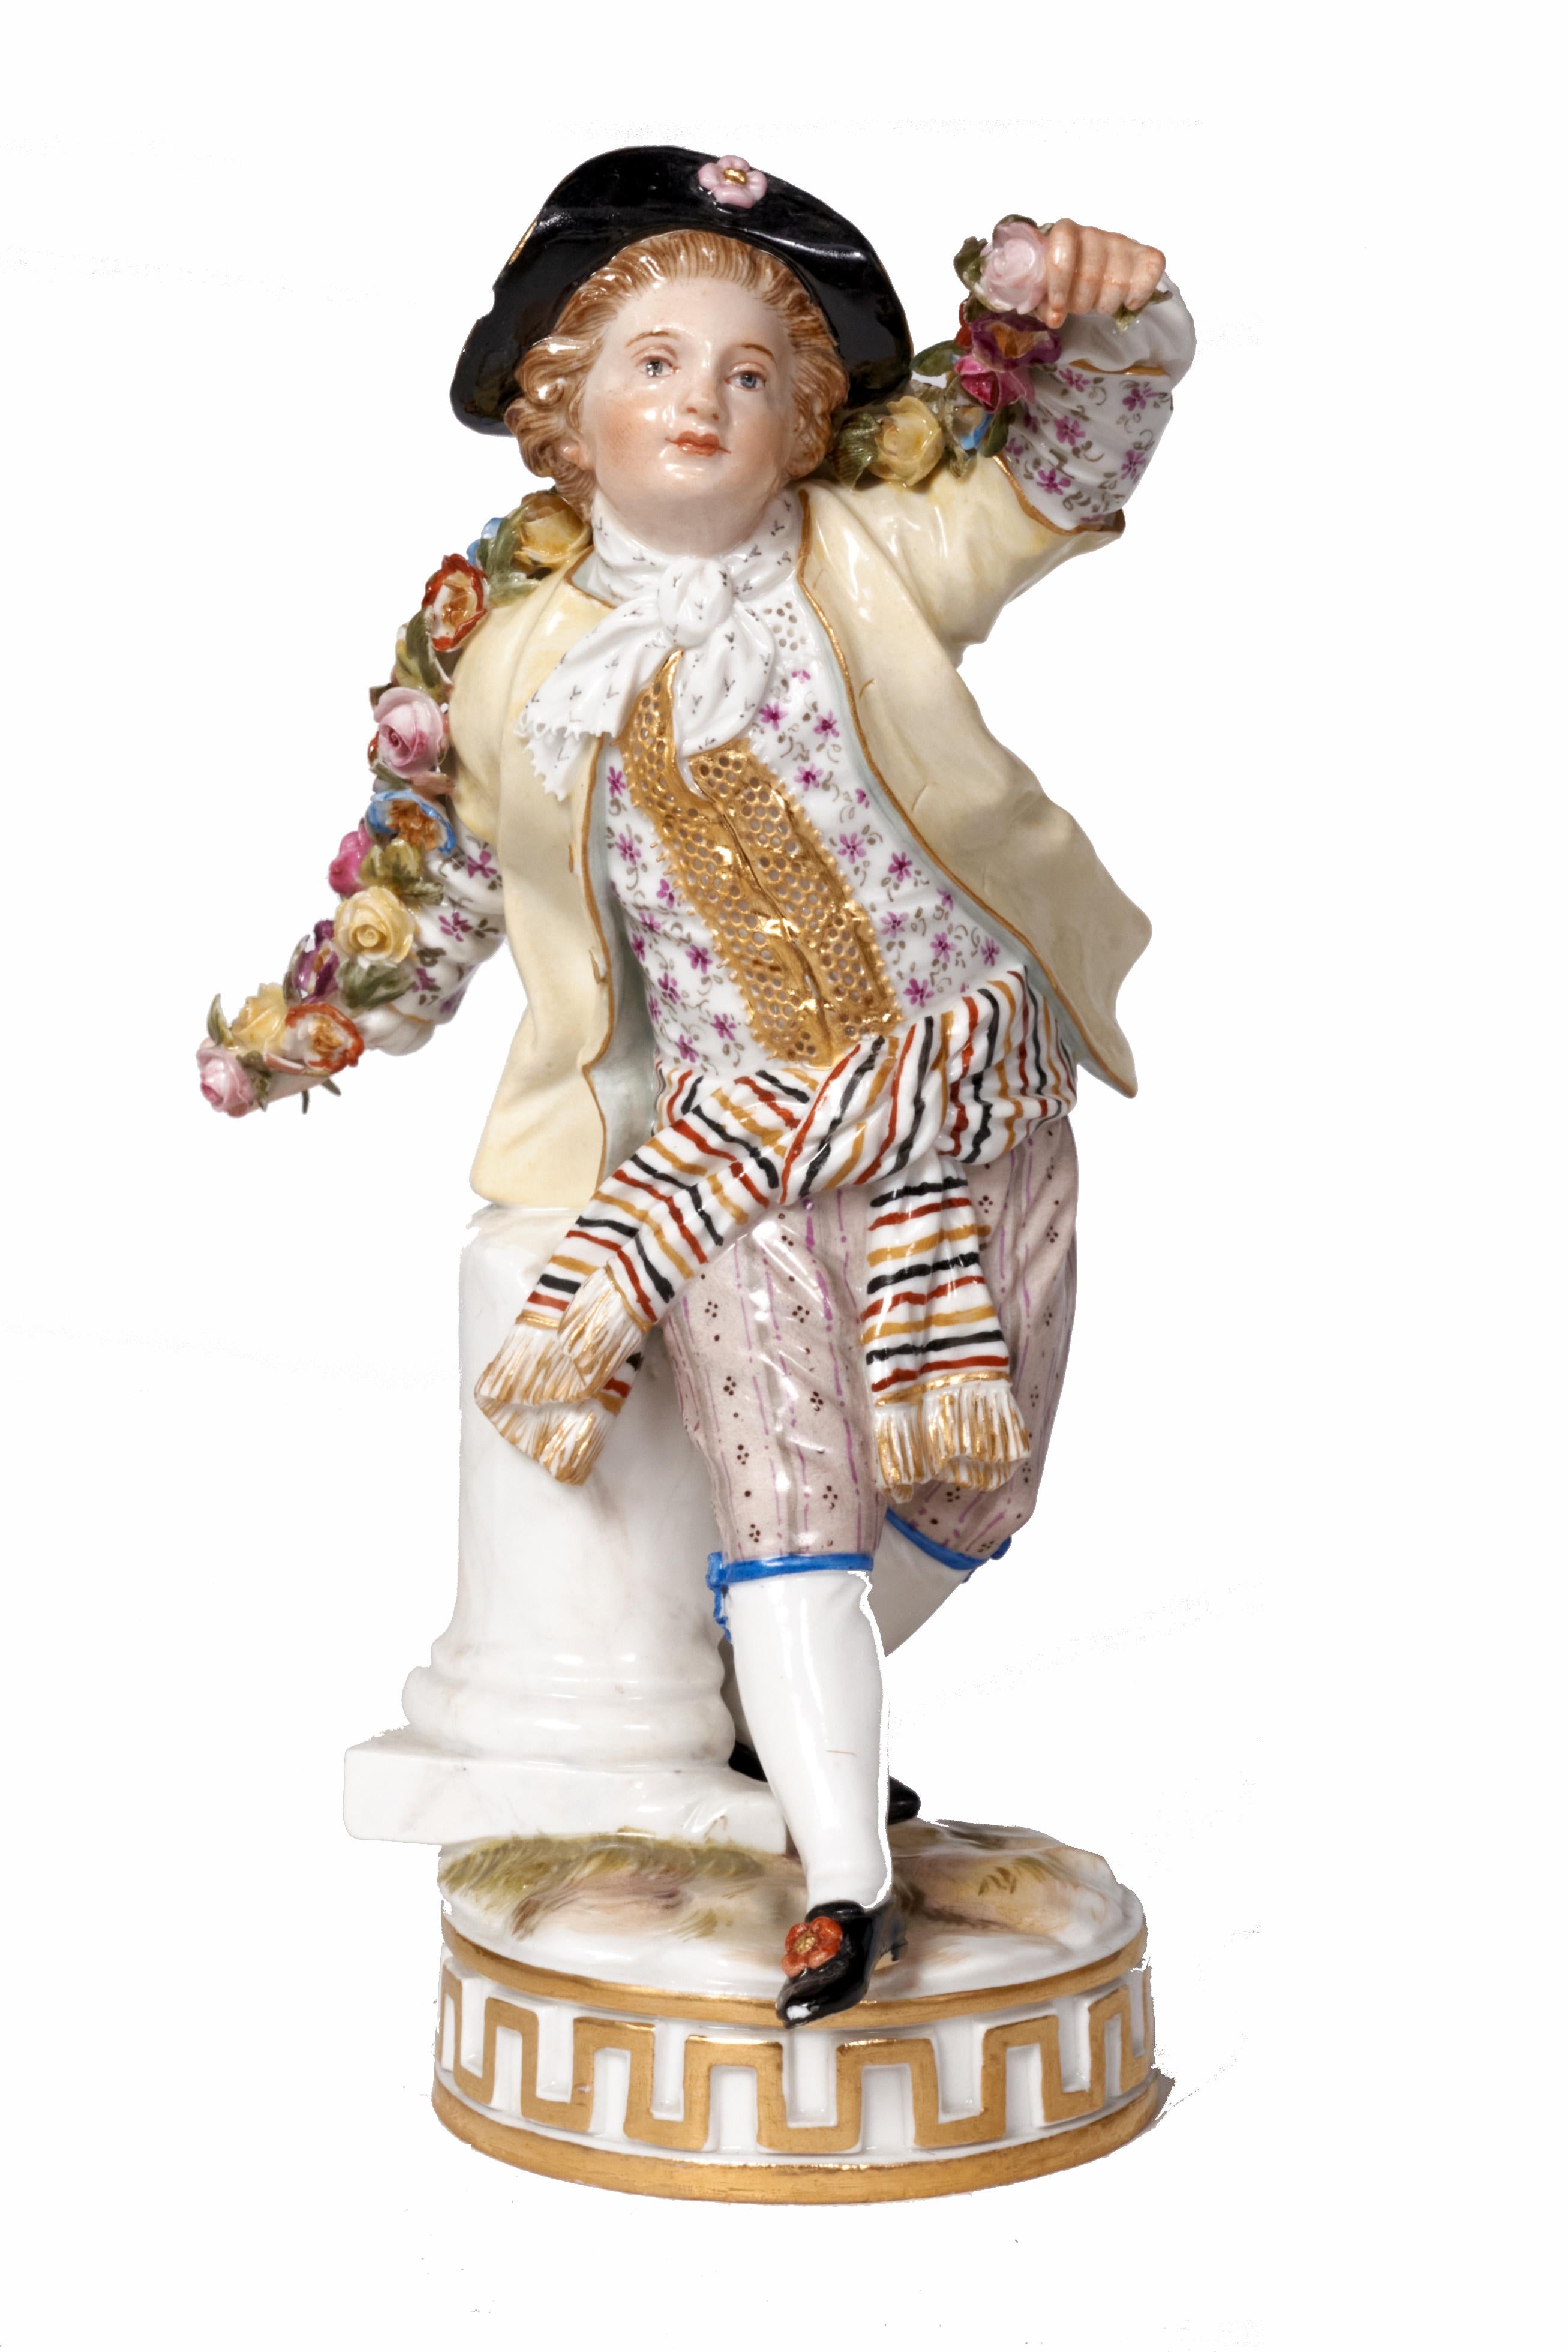 Lovely 19th century Meissen figurines holding garlands of flowers with incredible minute detail.
Decorated with gold and lace they are finely dressed. The woman is in excellent condition. She has a 1/8